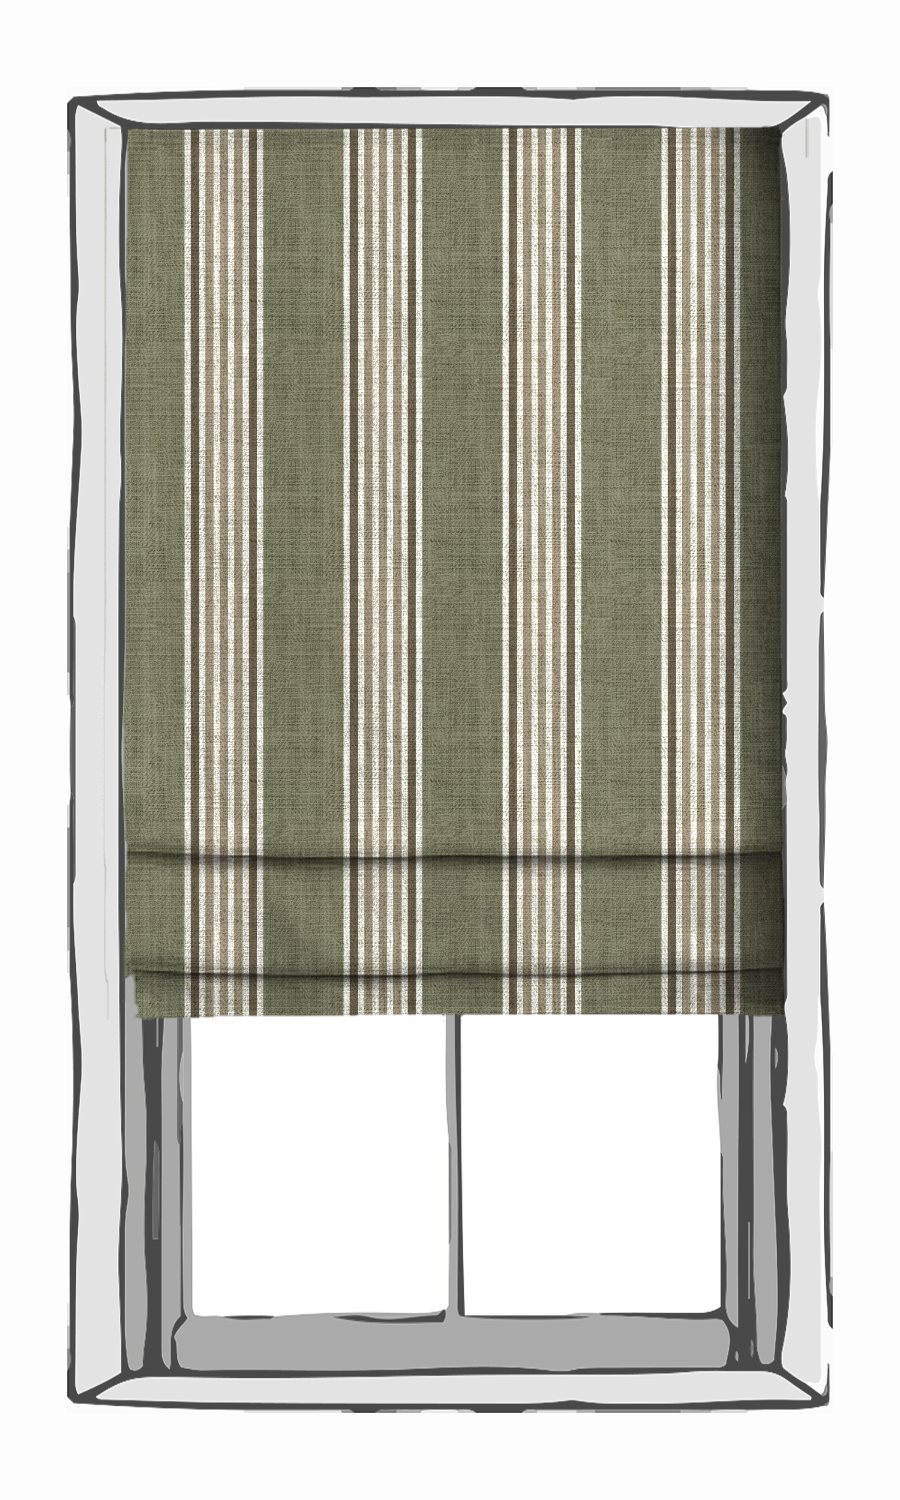 Lincoln Green' Striped Print Curtains (Olive Green/ Browns)